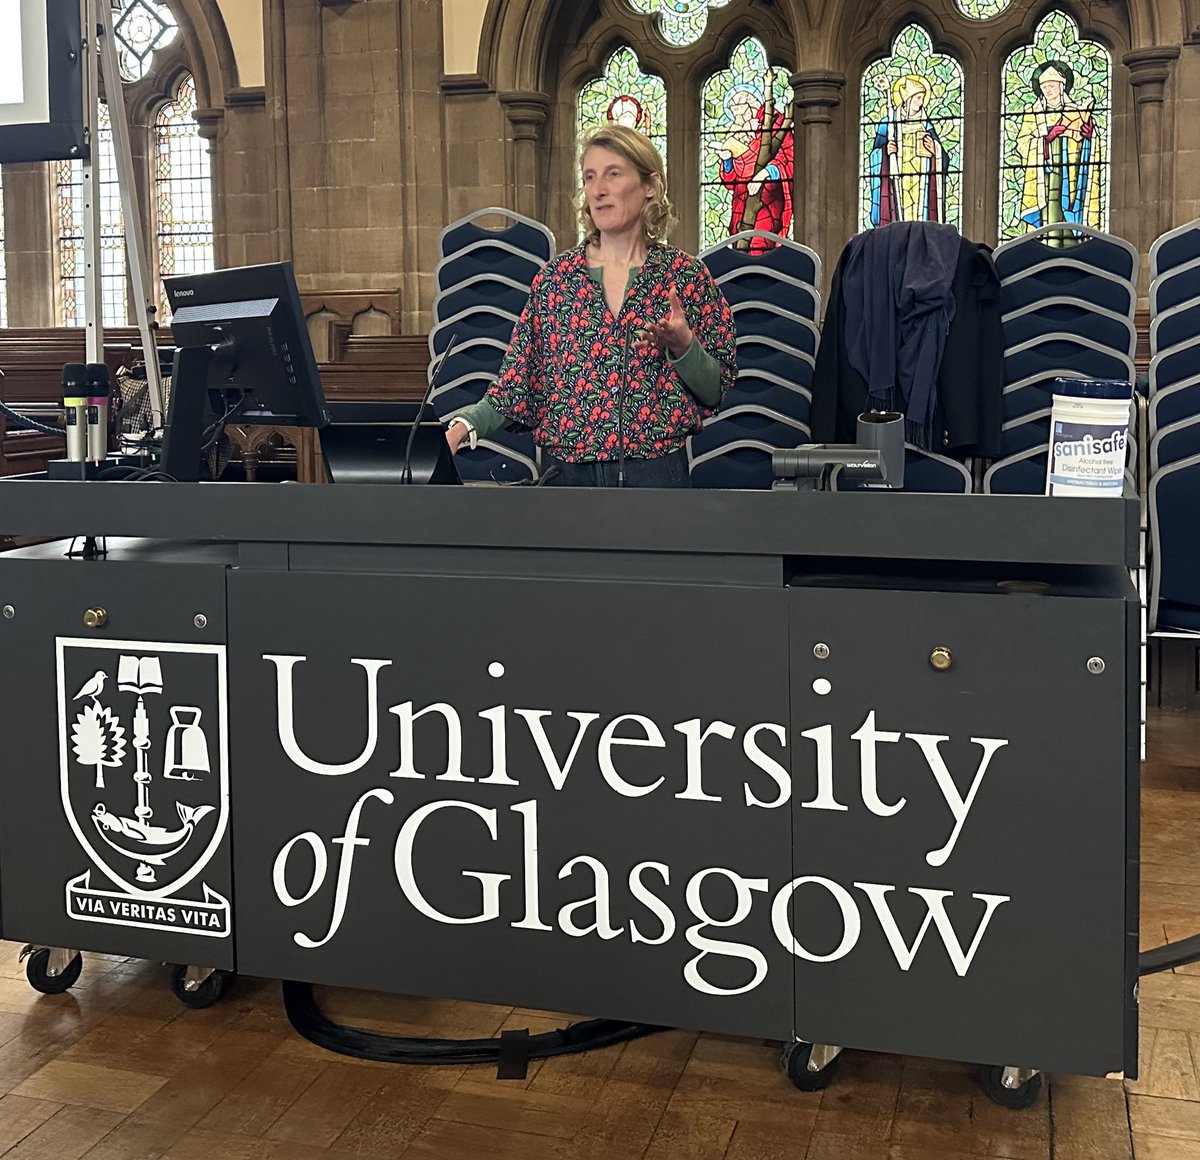 Fabulous to have Anna Graham, Head of Sustainability @ScotchWhiskySWA talking to our 4th year undergraduate Business Ethics students @UofGAsbs @UofGlasgow Great questions from students related to balancing alcohol ethics with business!